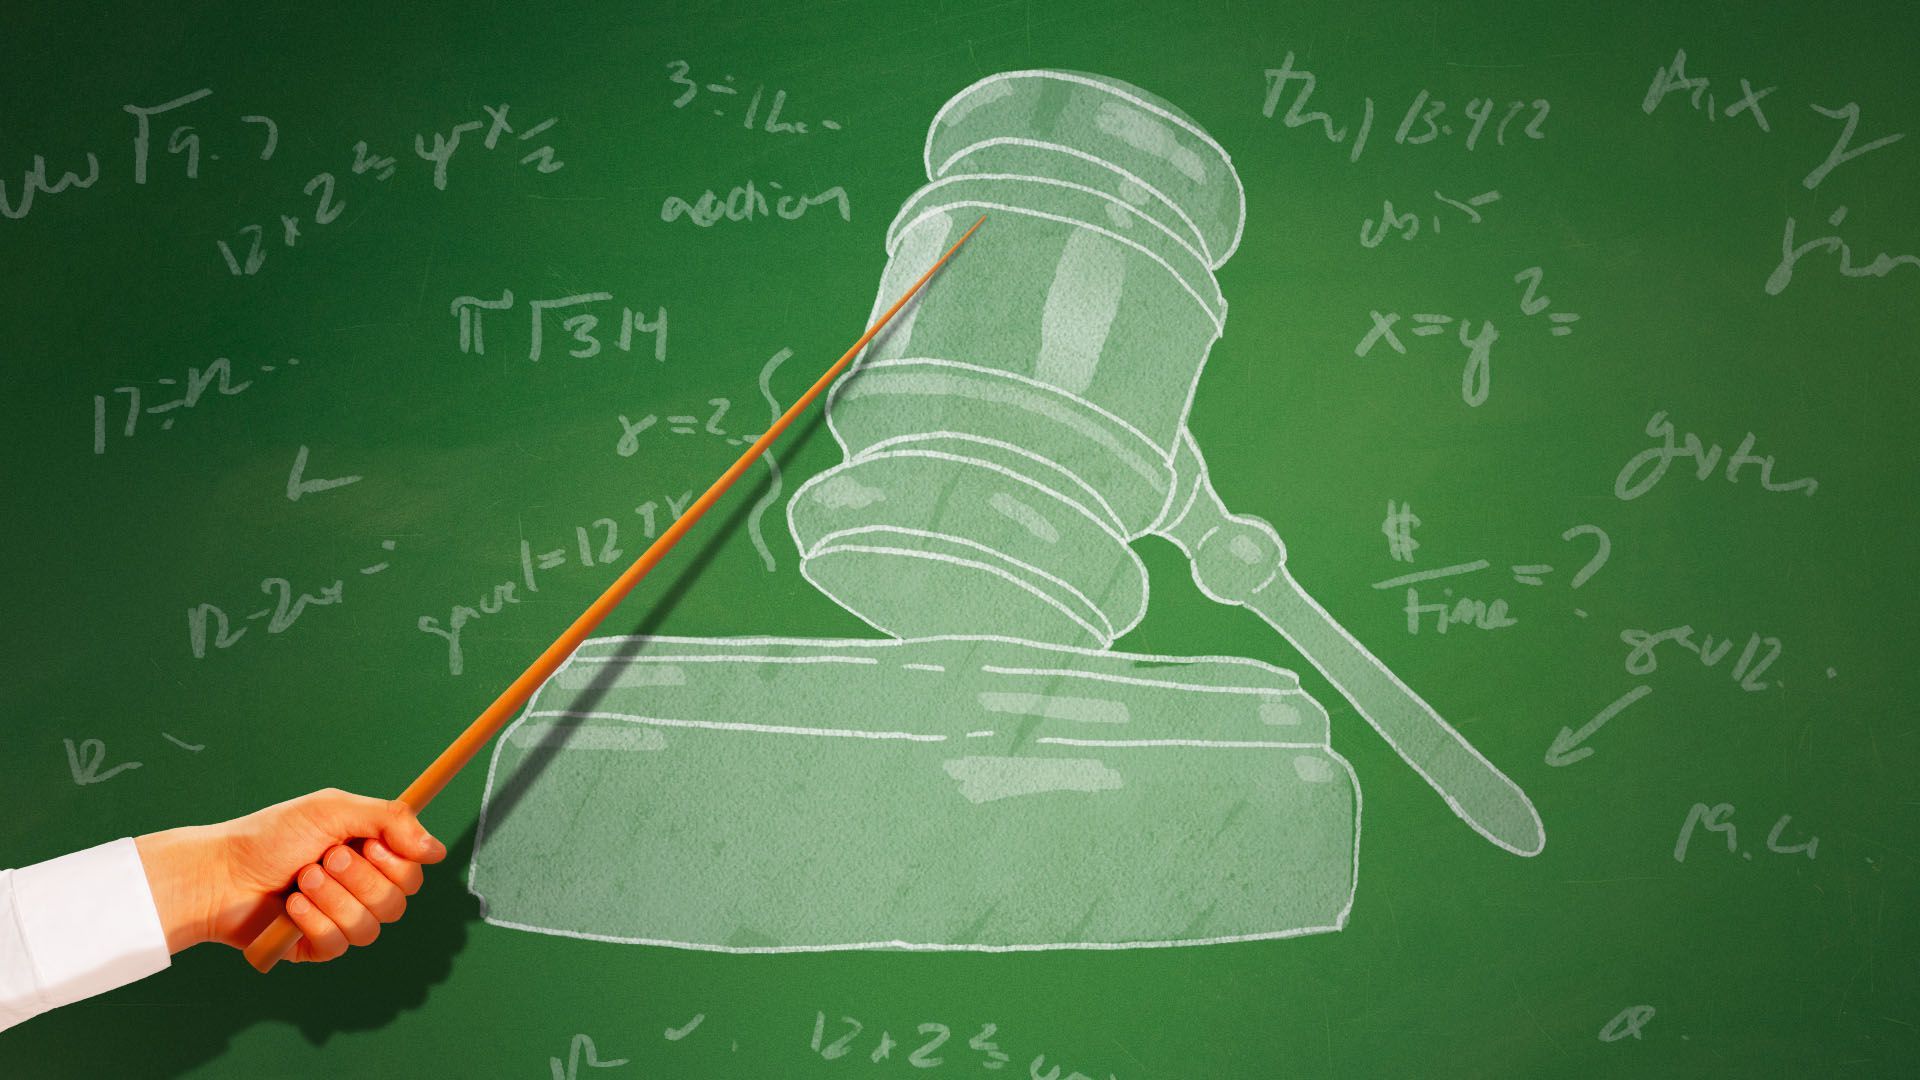 Illustration of a scientist pointing to a blackboard with a gavel drawn on it